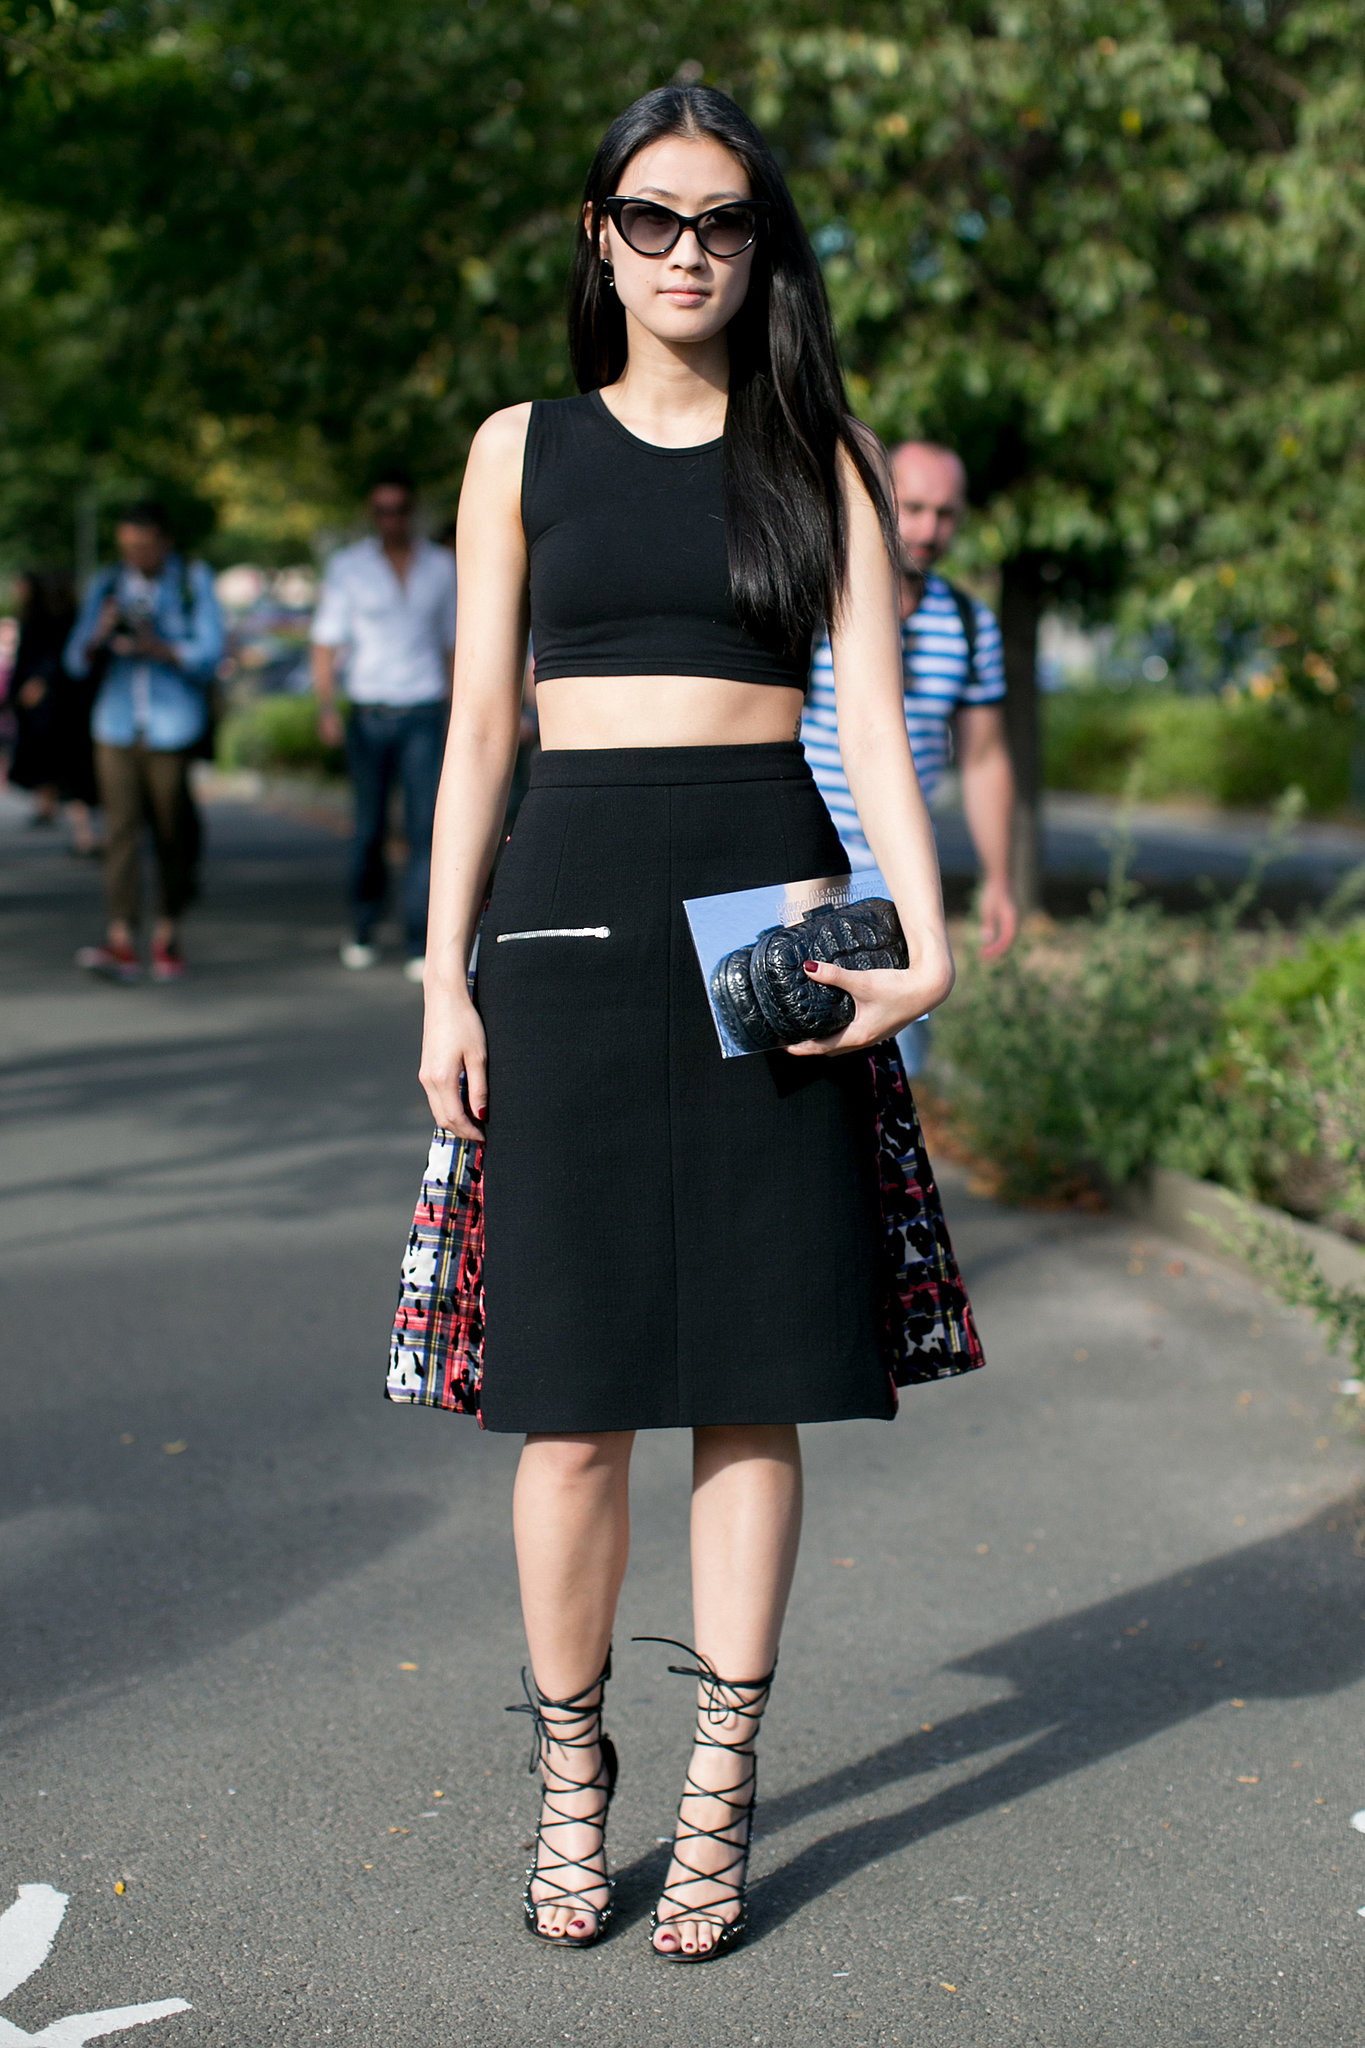 She got the memo on crop tops and lace-up heels, adding both to her Preen by Thornton Bregazzi skirt.
